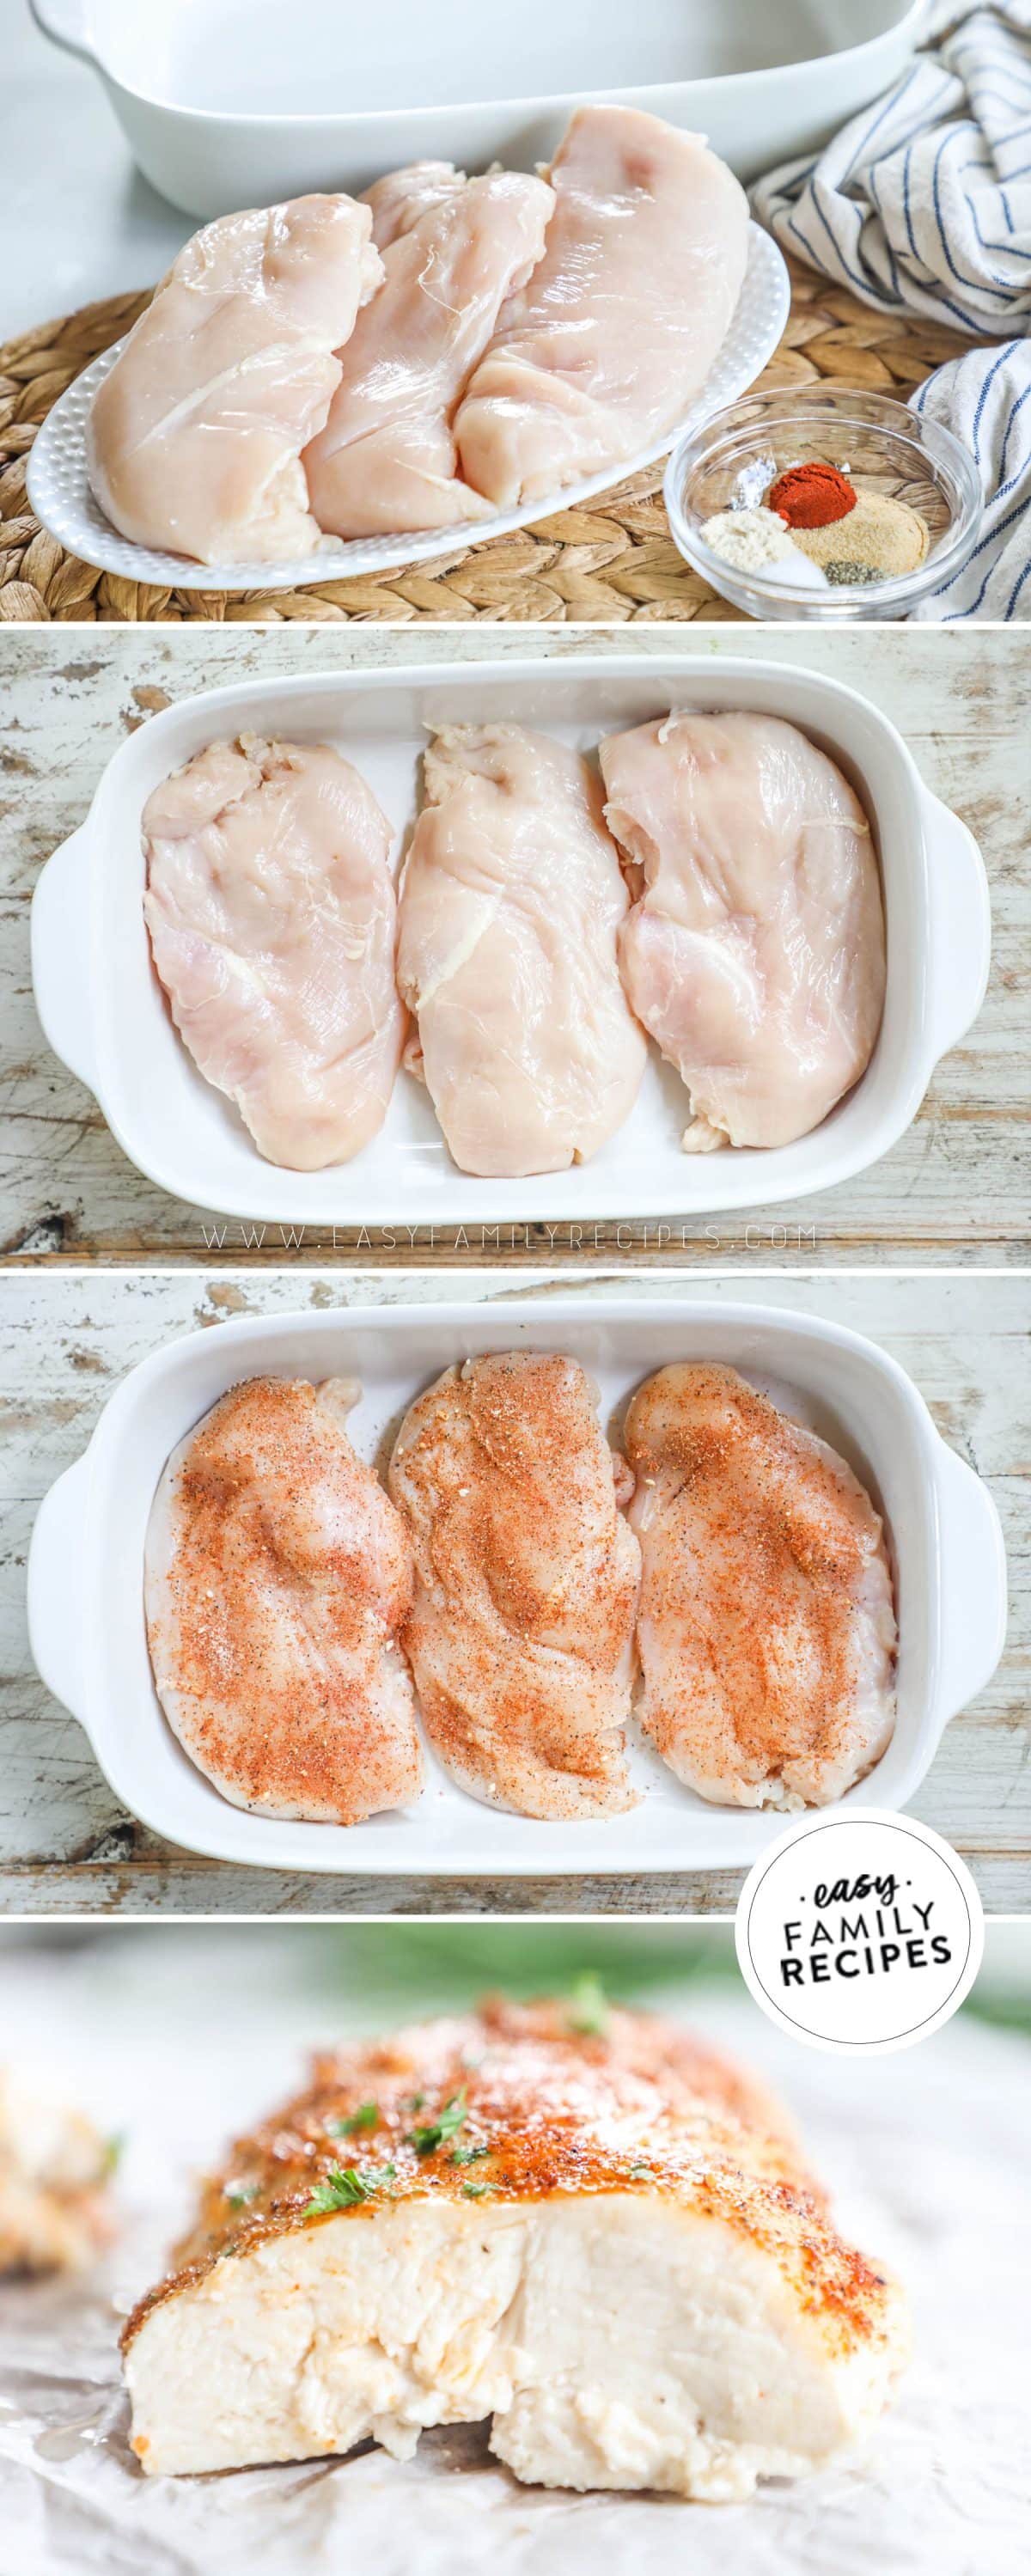 Photo collage for how to make baked chicken breasts 1. Gather ingredients for baked chicken. 2. Place chicken breast in baking dish. 3. season chicken 4. Bake chicken